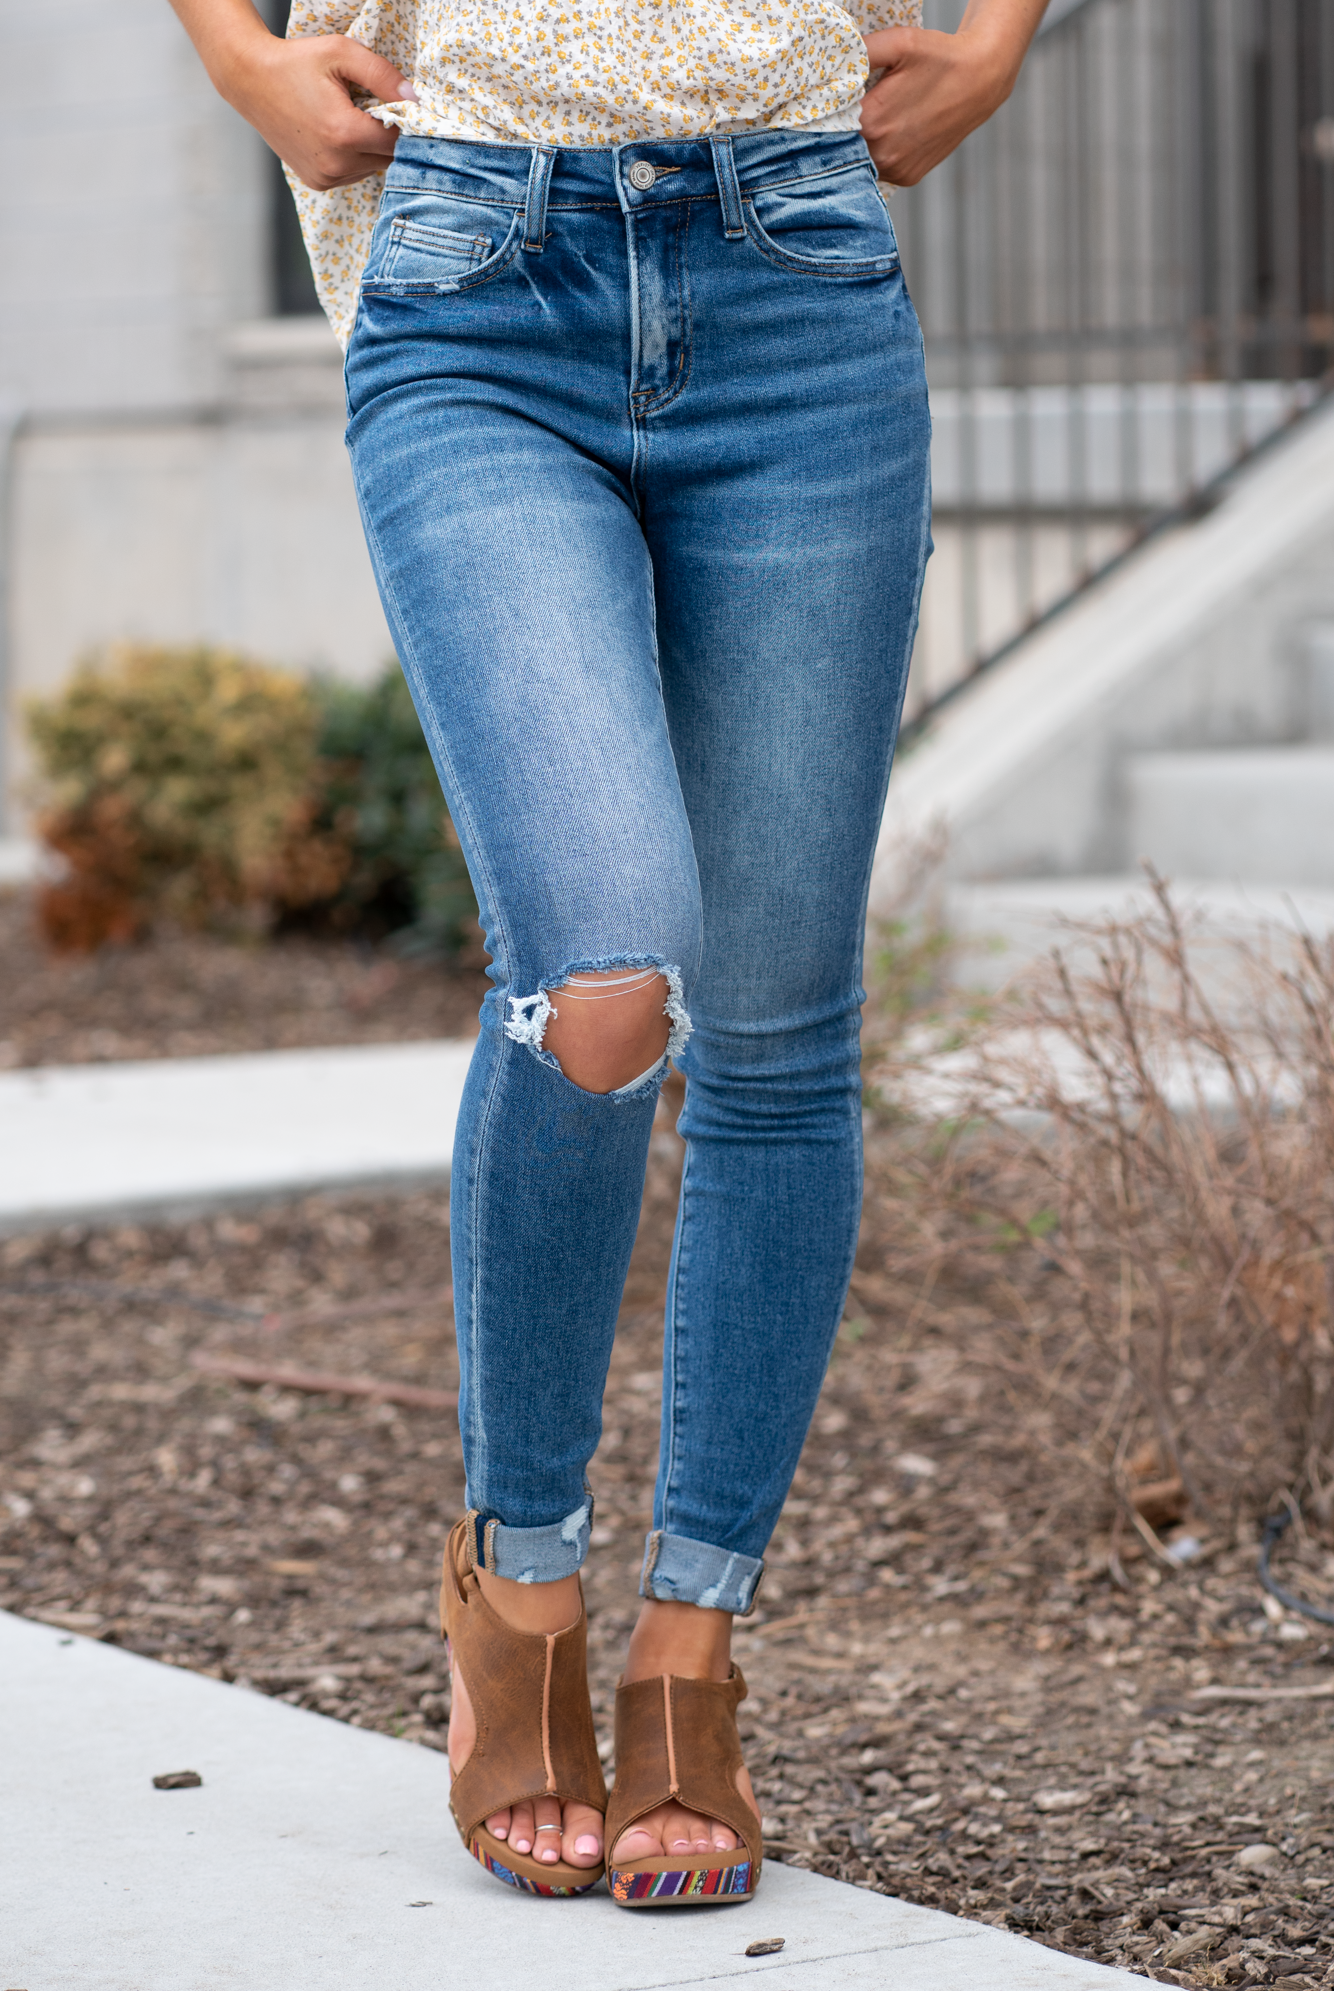 Vervet Flying Monkey Jeans  These high-rise straight distressed jeans are so cute for spring. Pair with sandals and a tank for a casual day-out look.  Style Name: Satisfactory  Color: Dark Blue Wash  Cut: Ankle Skinny, 27" Rise: Suoer High-Rise, 10" Front Rise Material: 90.5%COTTON, 7.5%POLYESTER, 2%SPANDEX Machine Wash Separately In Cold Water Stitching: Classic Fly: Zip Fly Style #: V2270M